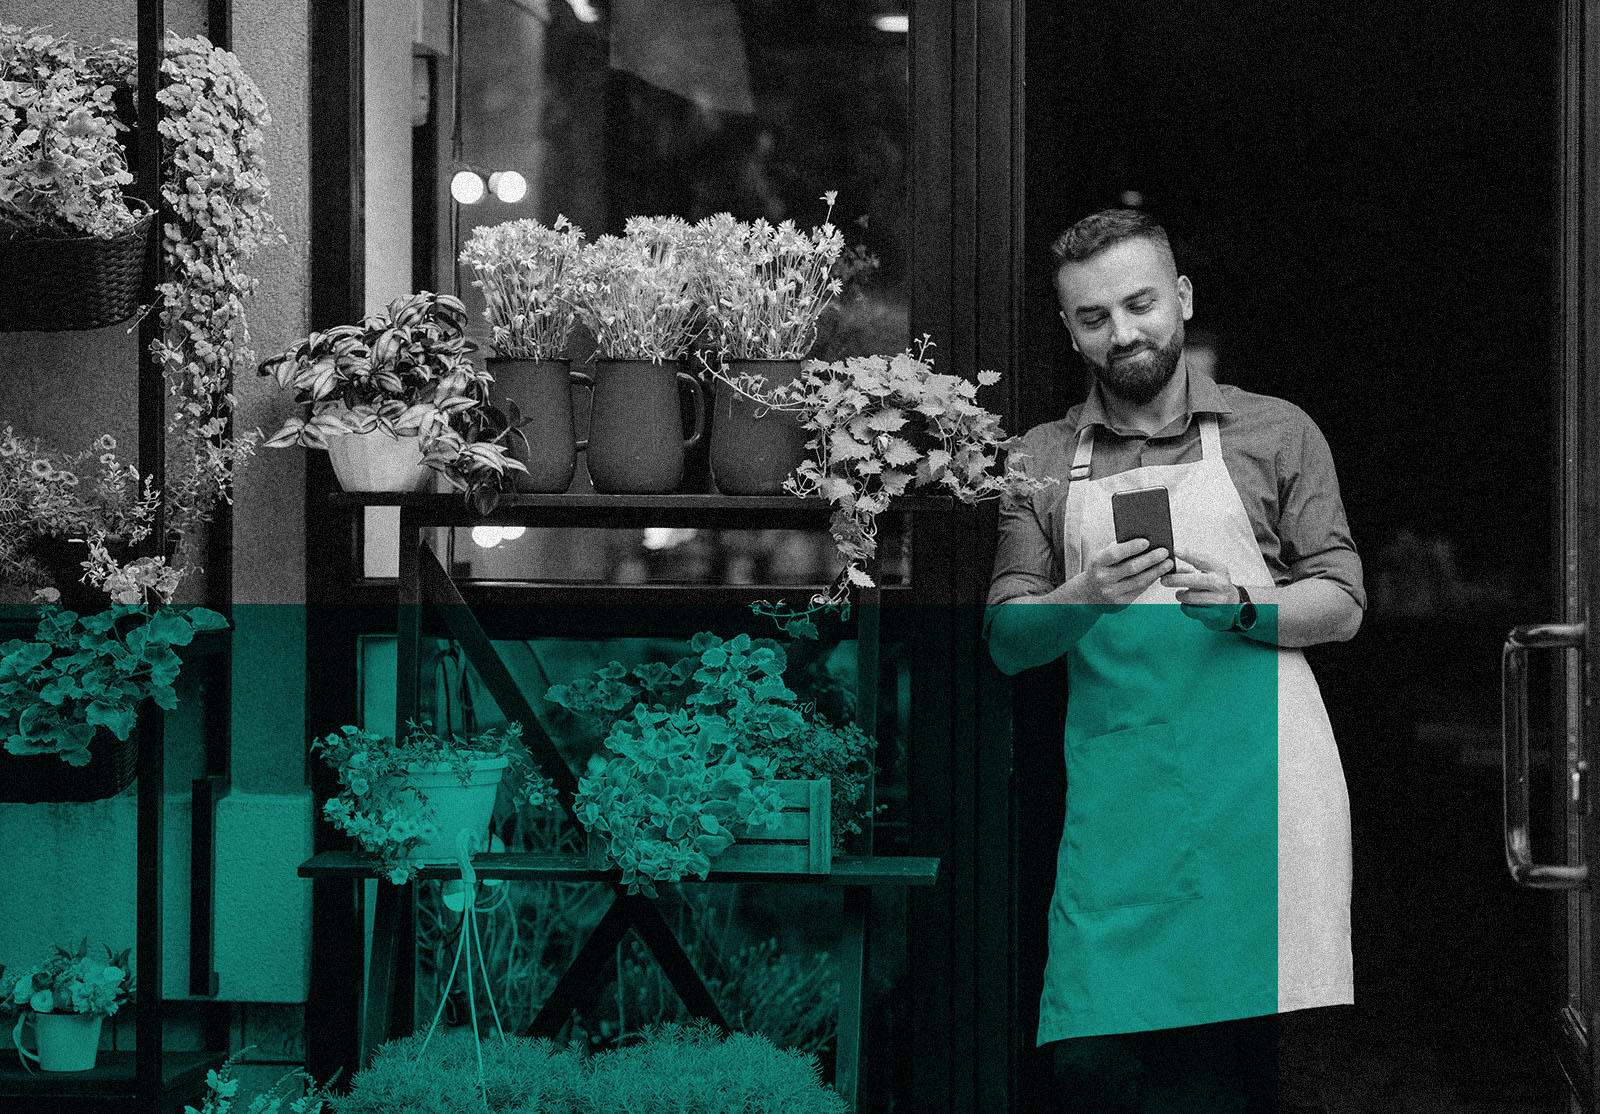 Smiling man in apron in frontof his flower shop